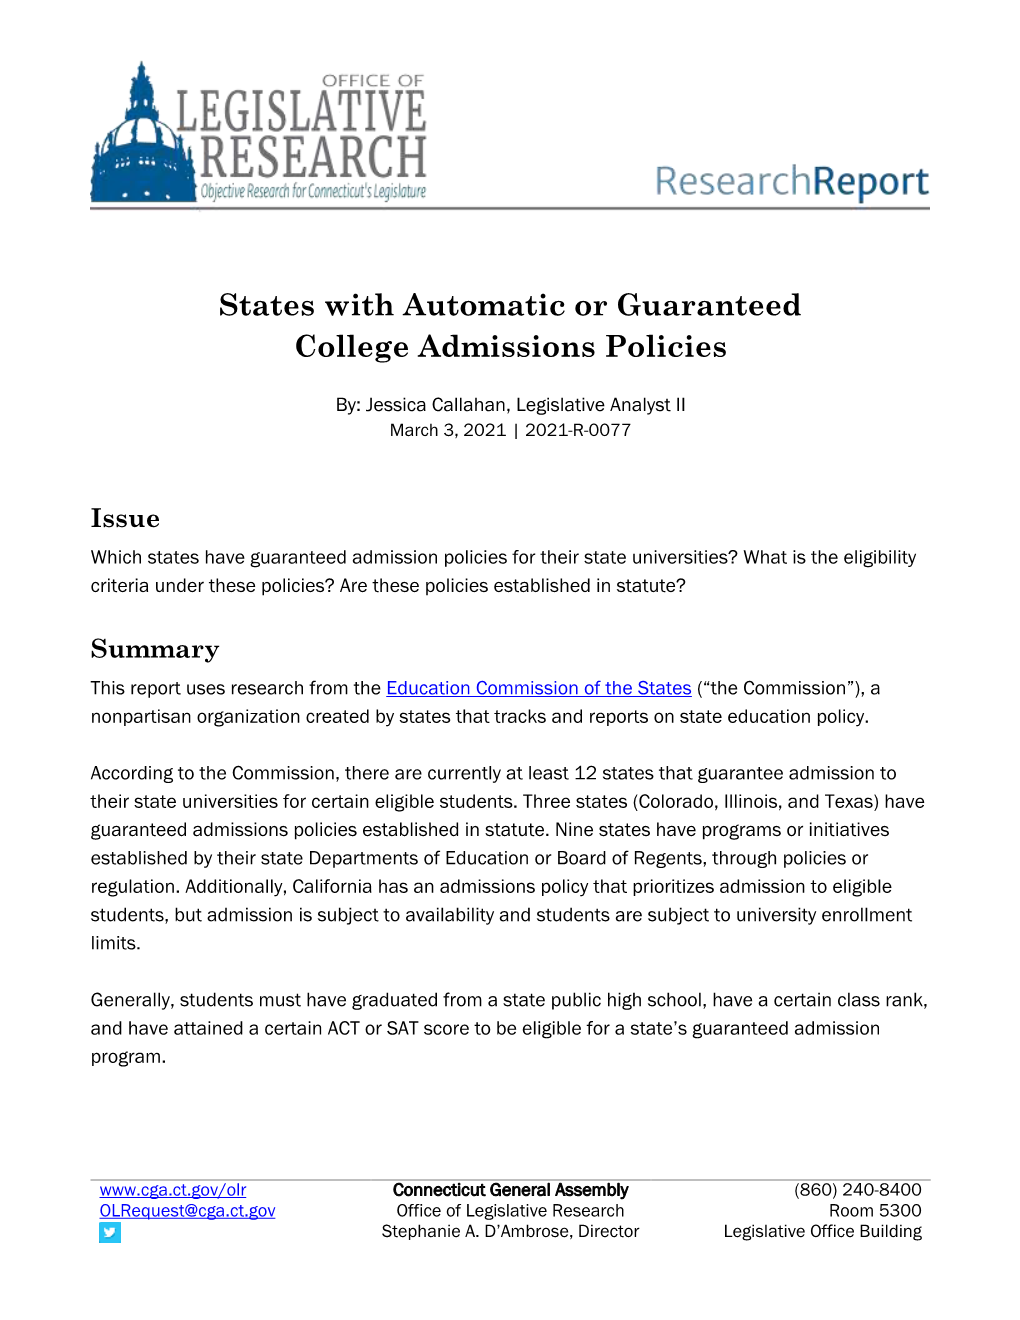 States with Automatic Or Guaranteed College Admissions Policies